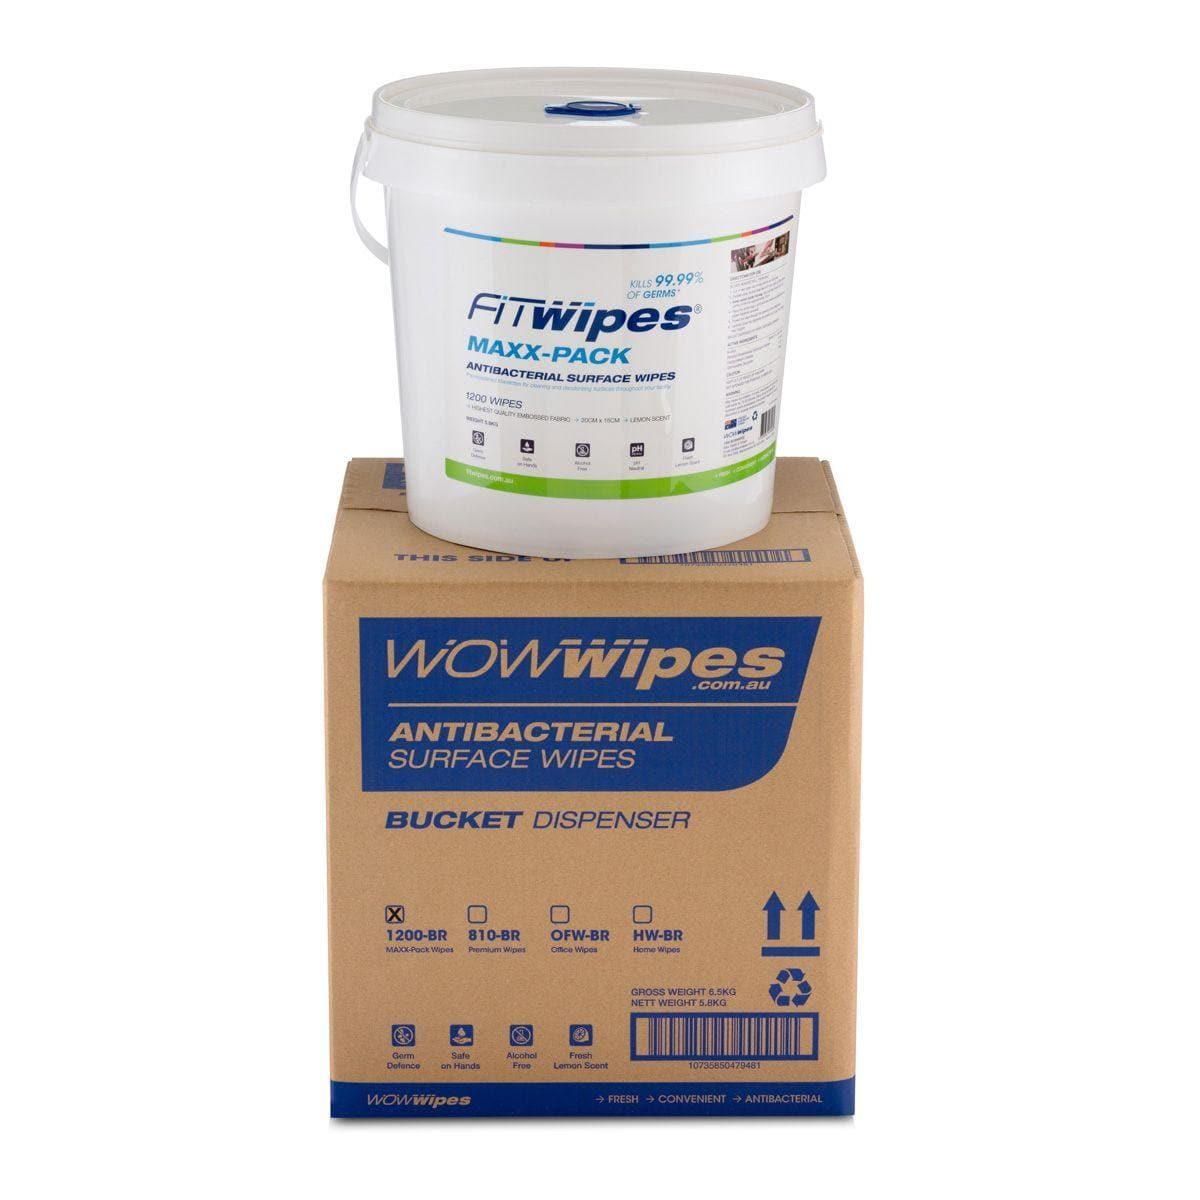 WOW Wipes Antibacterial Gym Wipes - Musclemania Fitness MegaStore